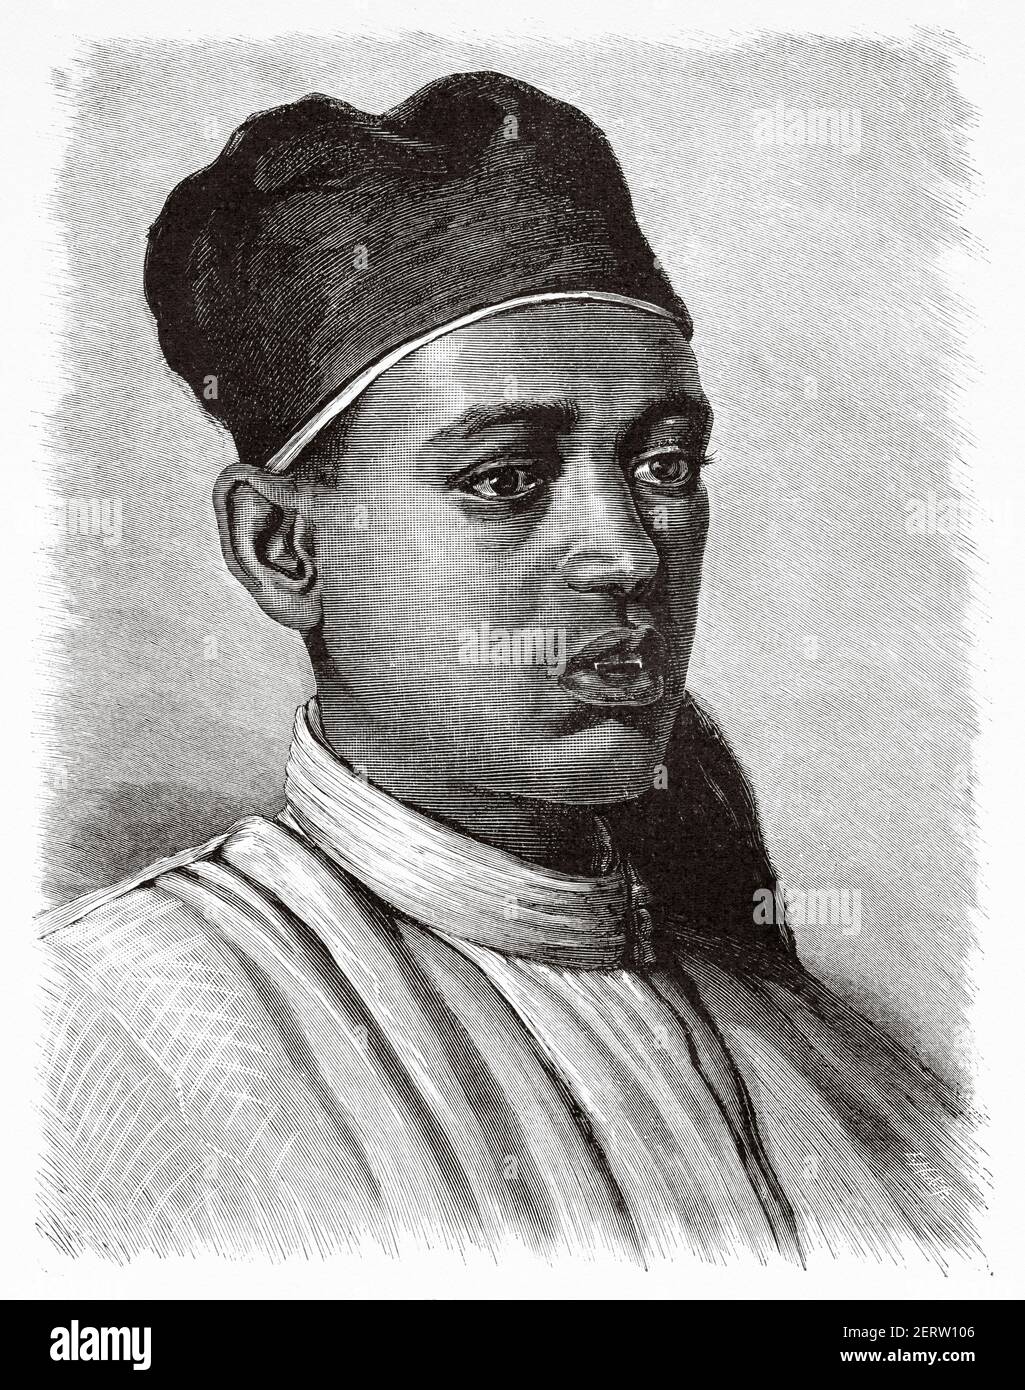 Portrait of a young native of Aswan, Egypt in XIX century. Africa. Old 19th century engraved illustration, El Mundo Ilustrado 1881 Stock Photo